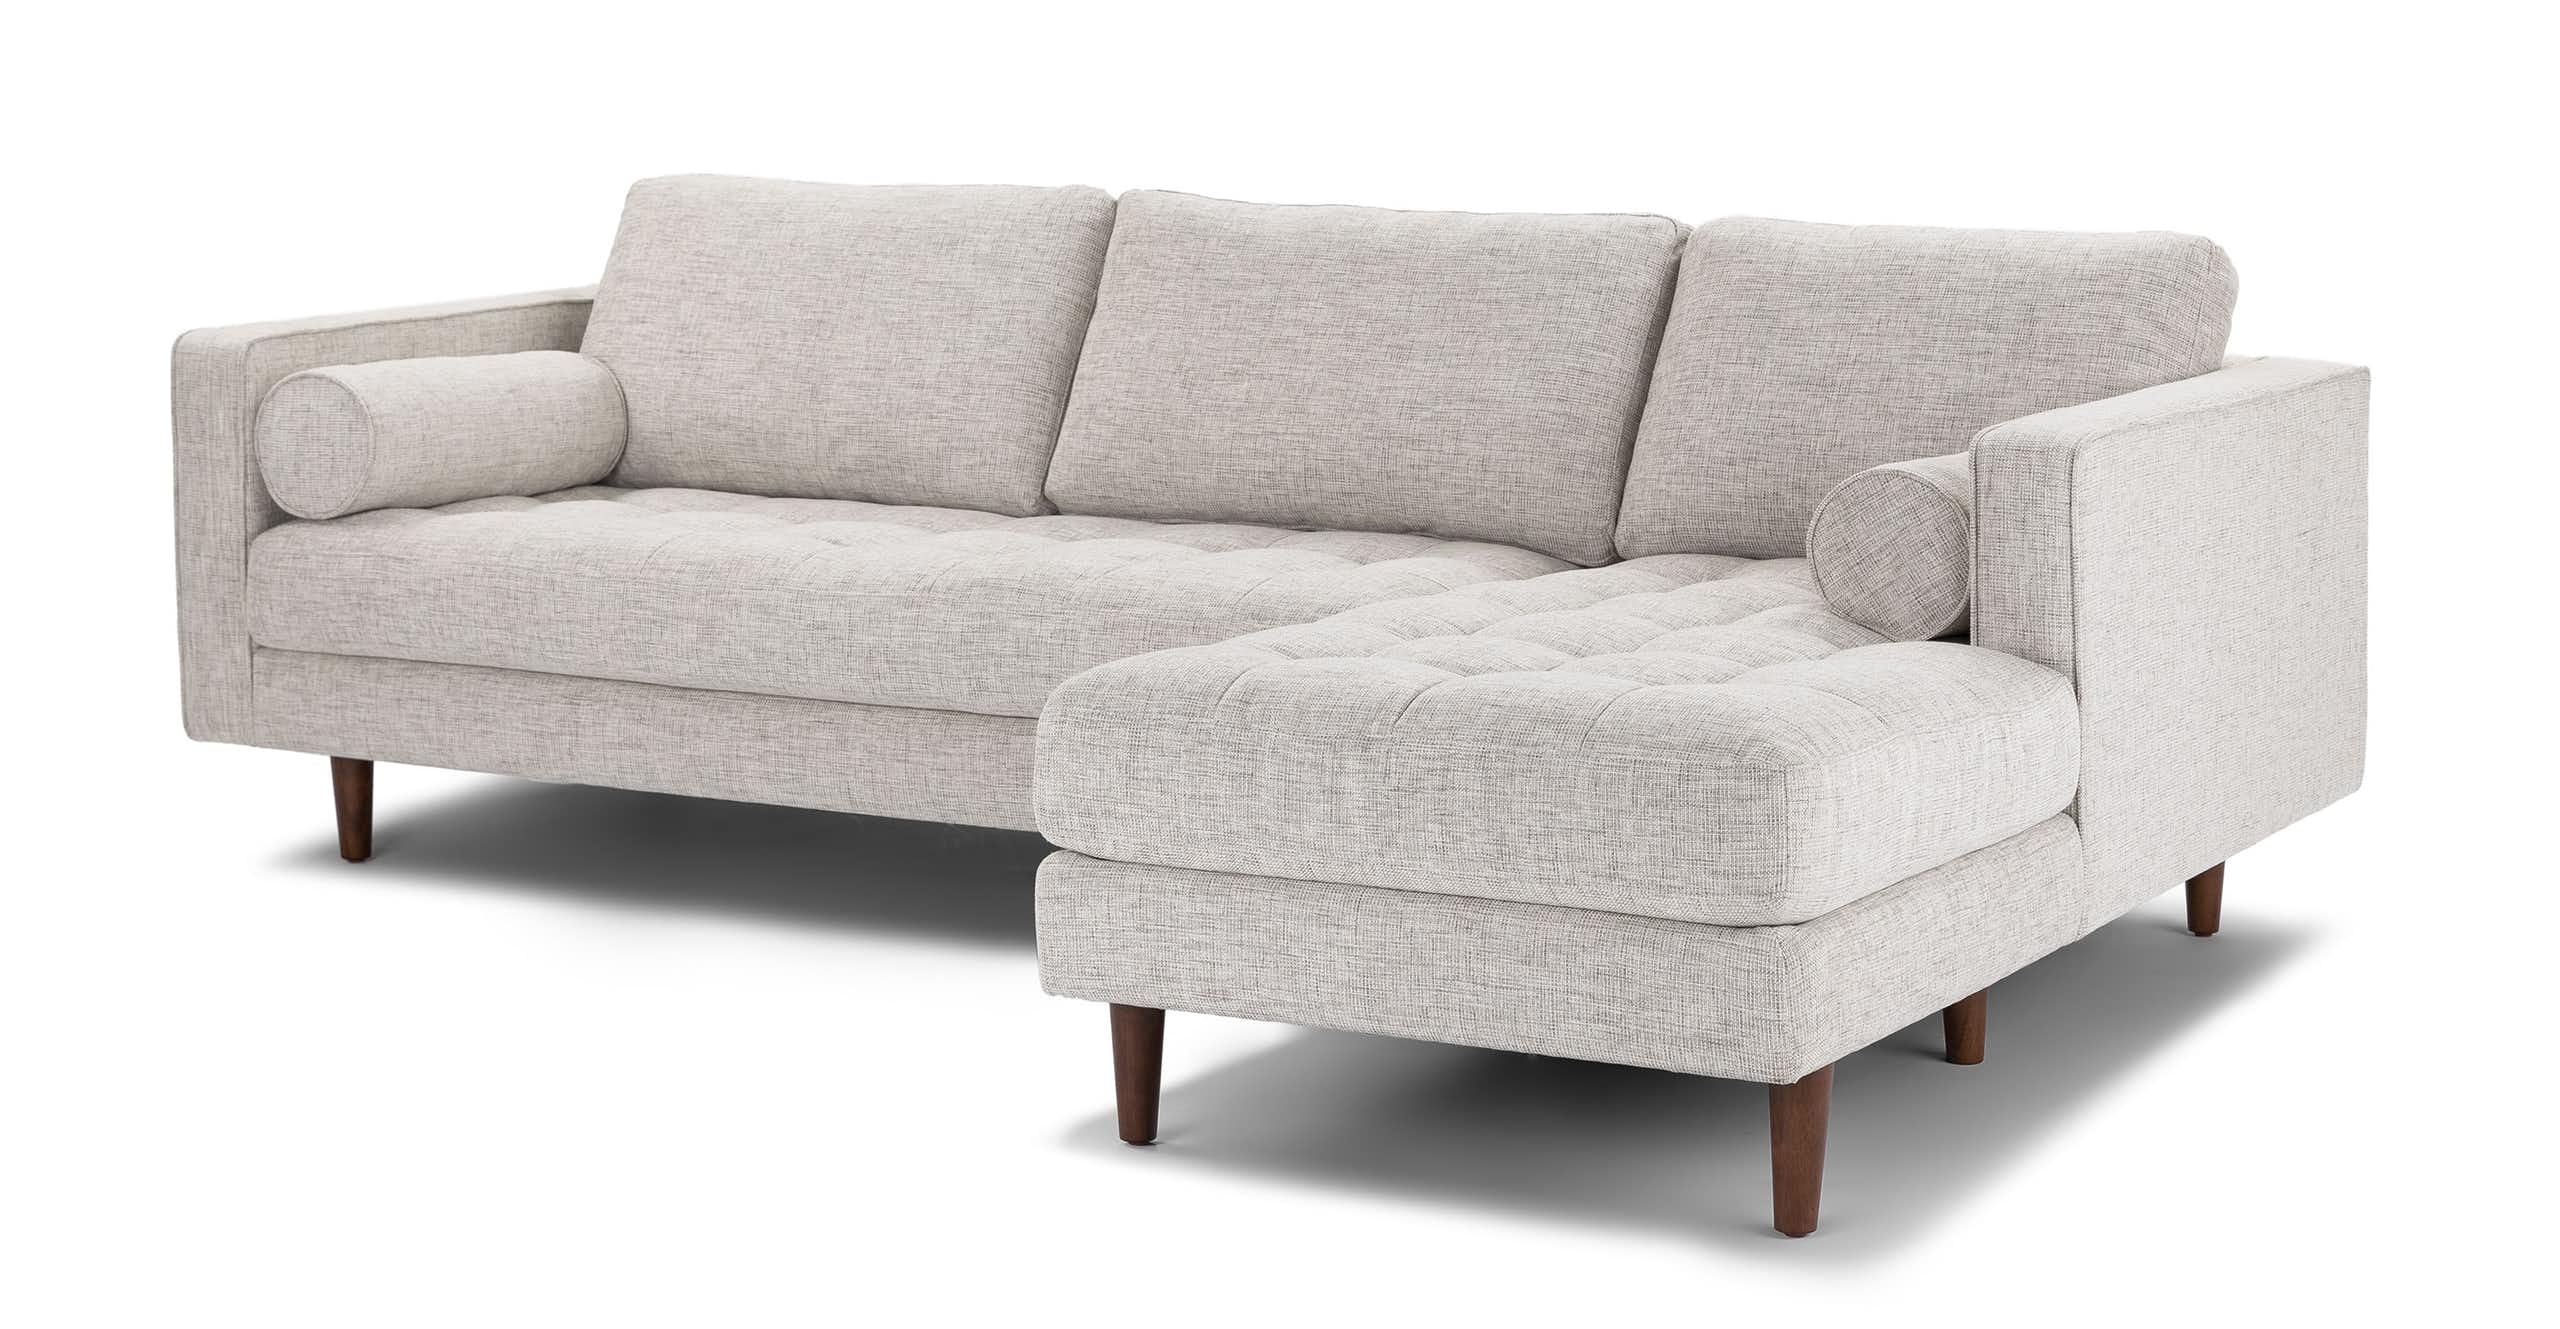 Sven Birch Ivory Right Sectional Sofa - Image 1